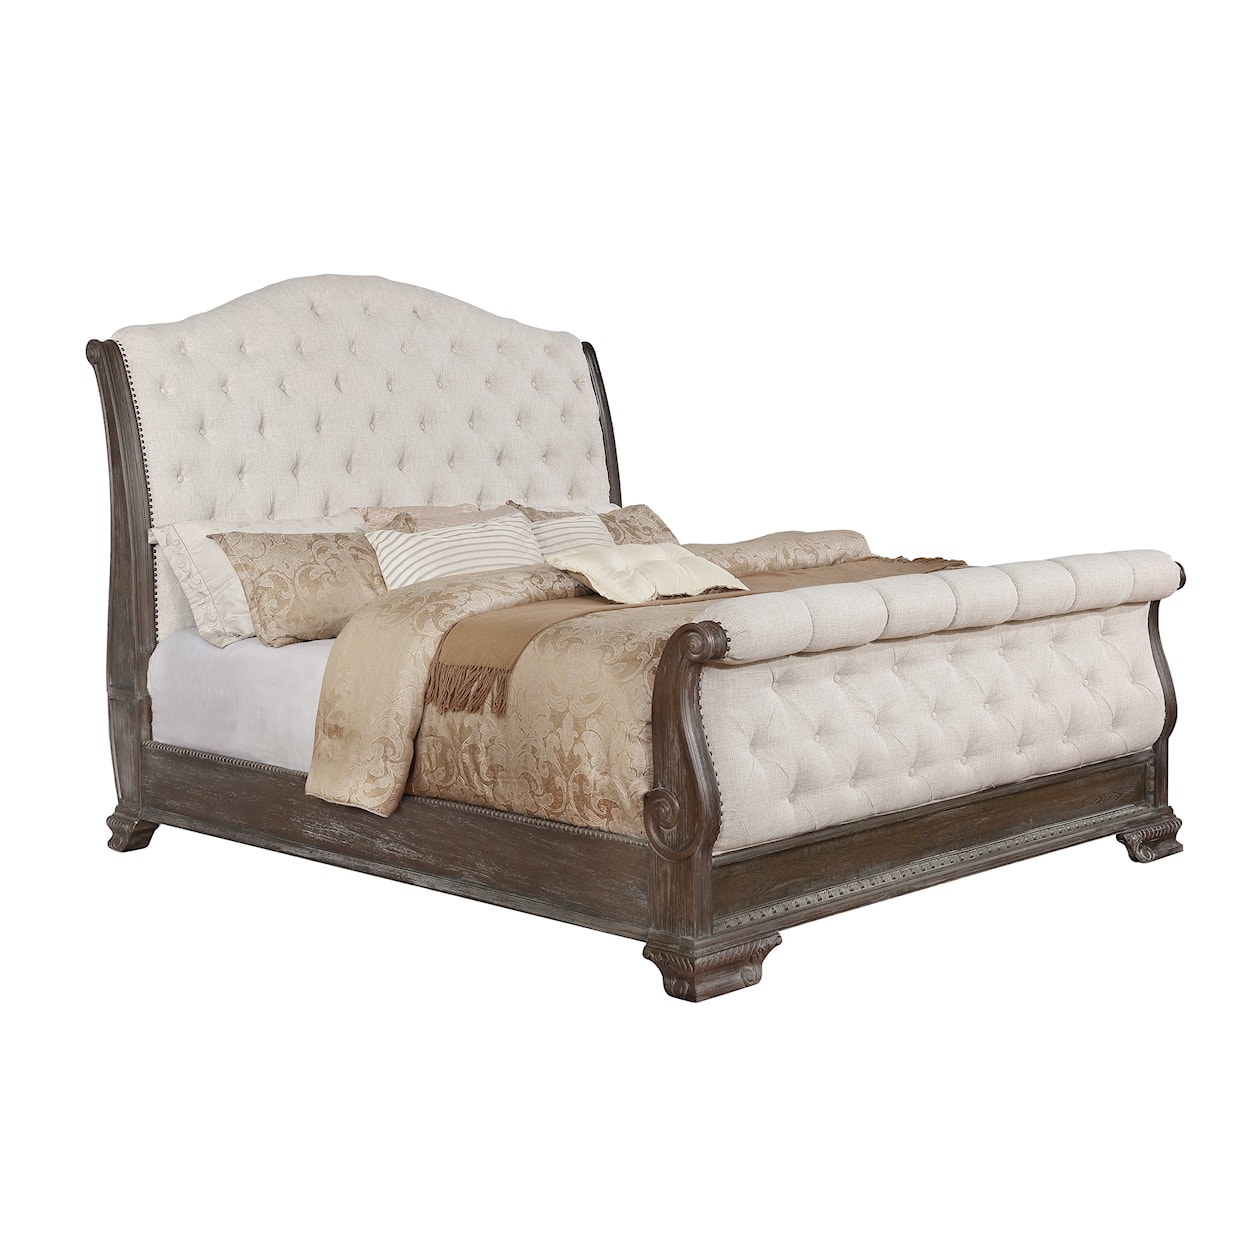 CM Sheffield Upholstered Queen Bed